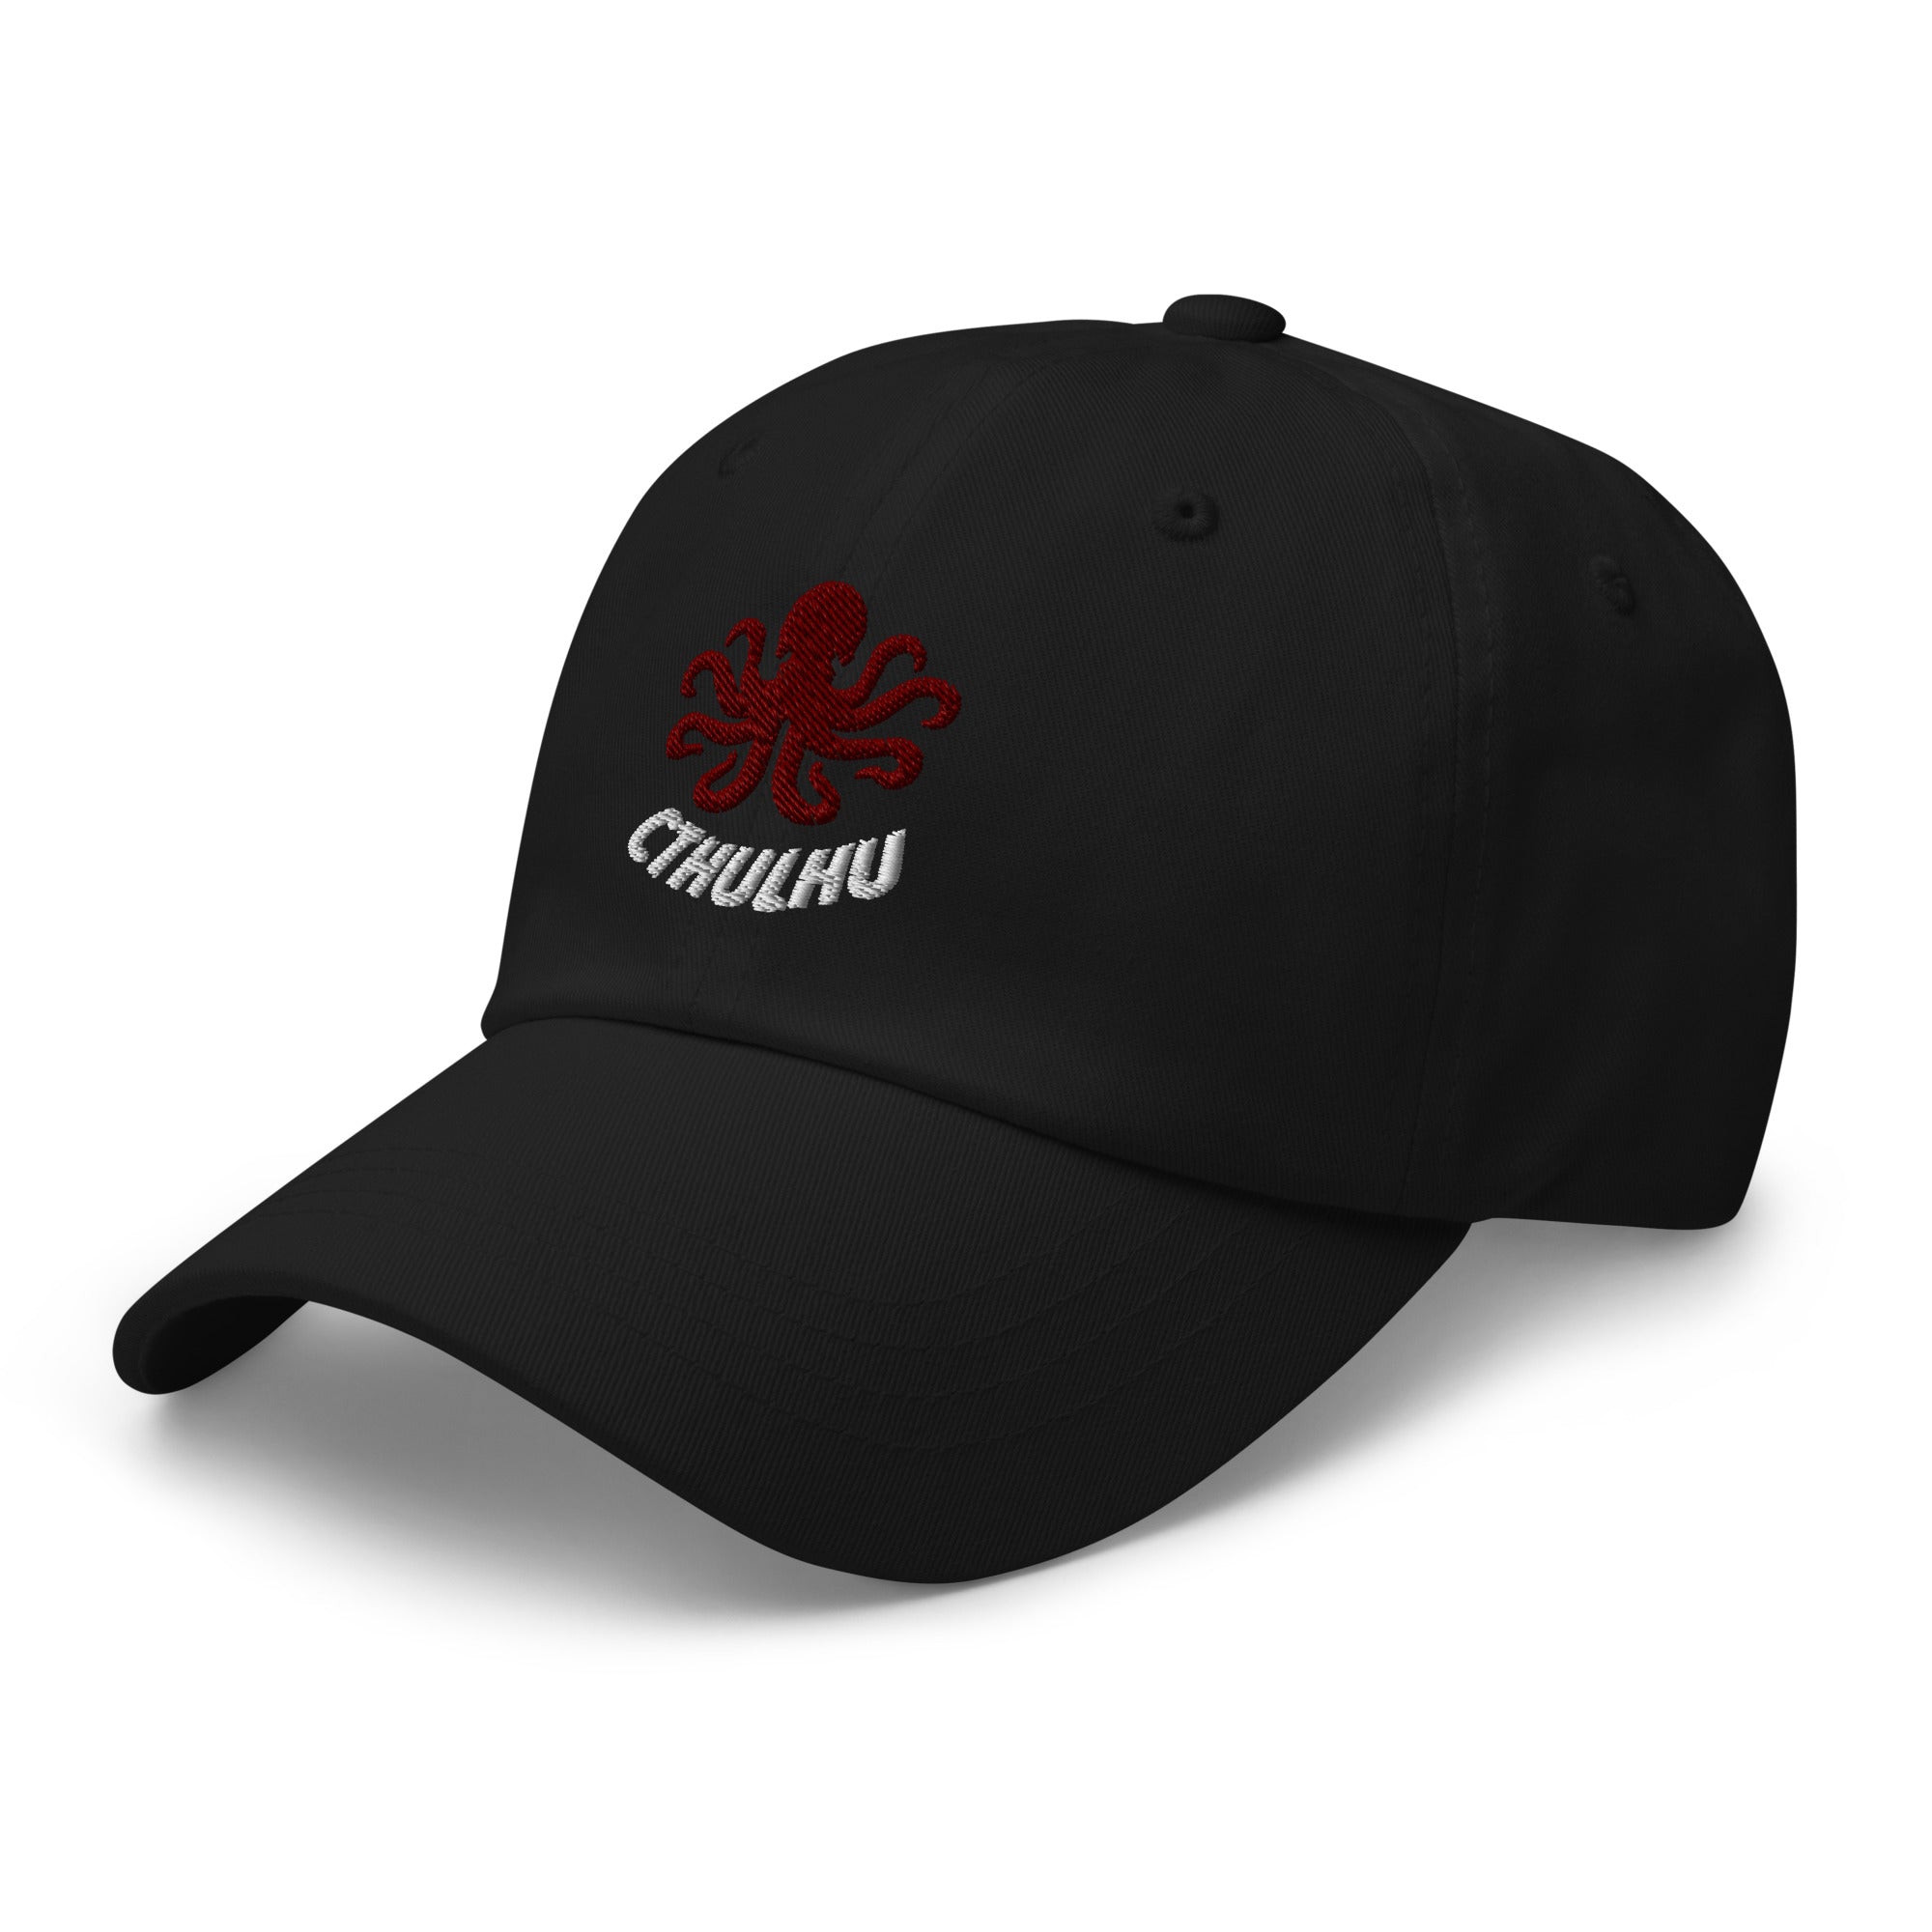 The Call of Cthulhu Horror Fiction Embroidered Baseball Cap H.P. Lovecraft Dad hat - Edge of Life Designs